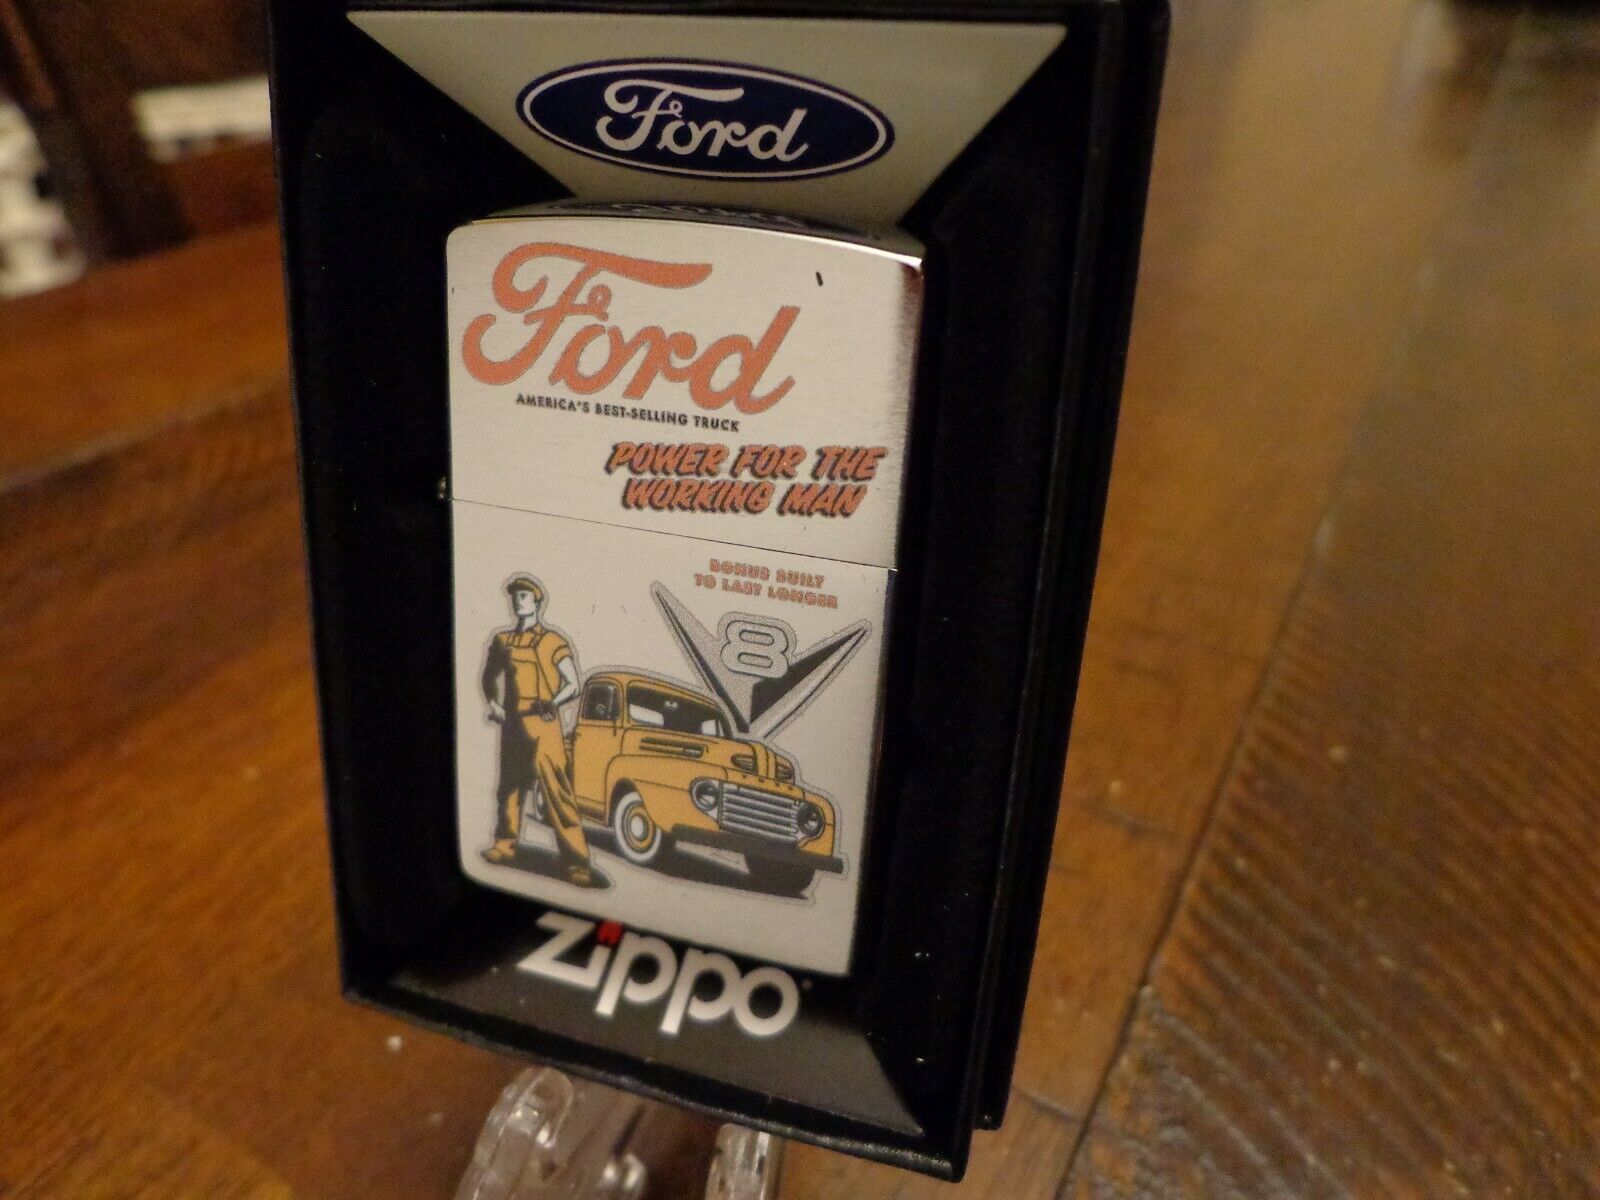 FORD PICKUP TRUCK POWER FOR THE WORKING MAN ZIPPO LIGHTER MINT IN BOX